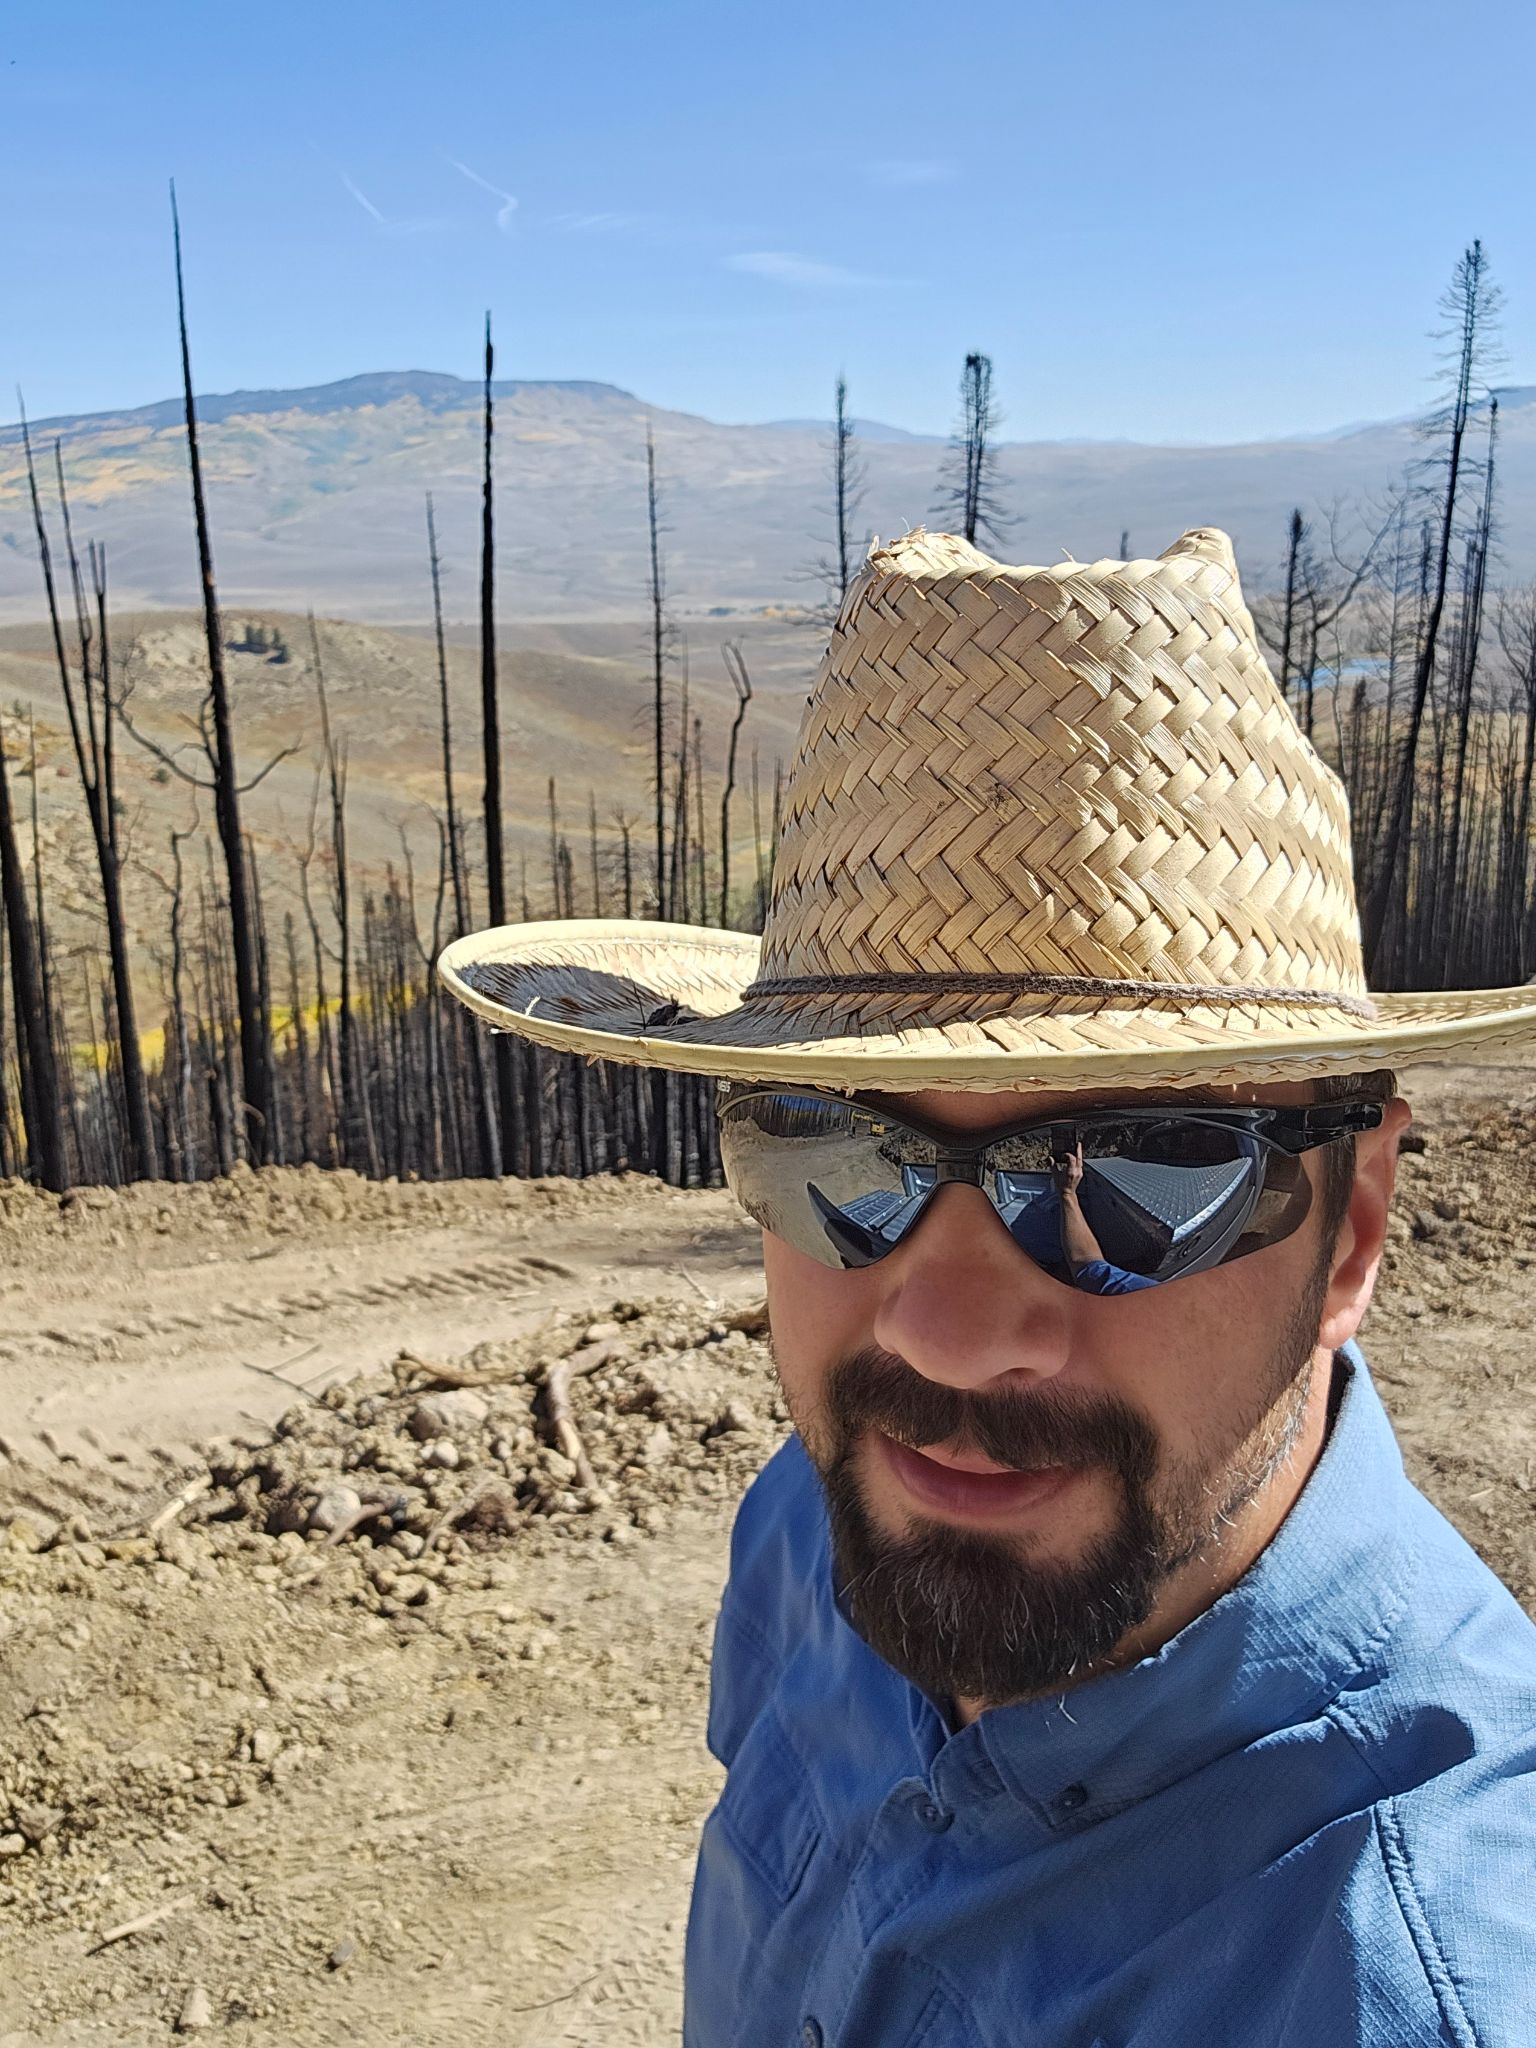 John is standing on a dirt road with burnt trees and mountains in the background